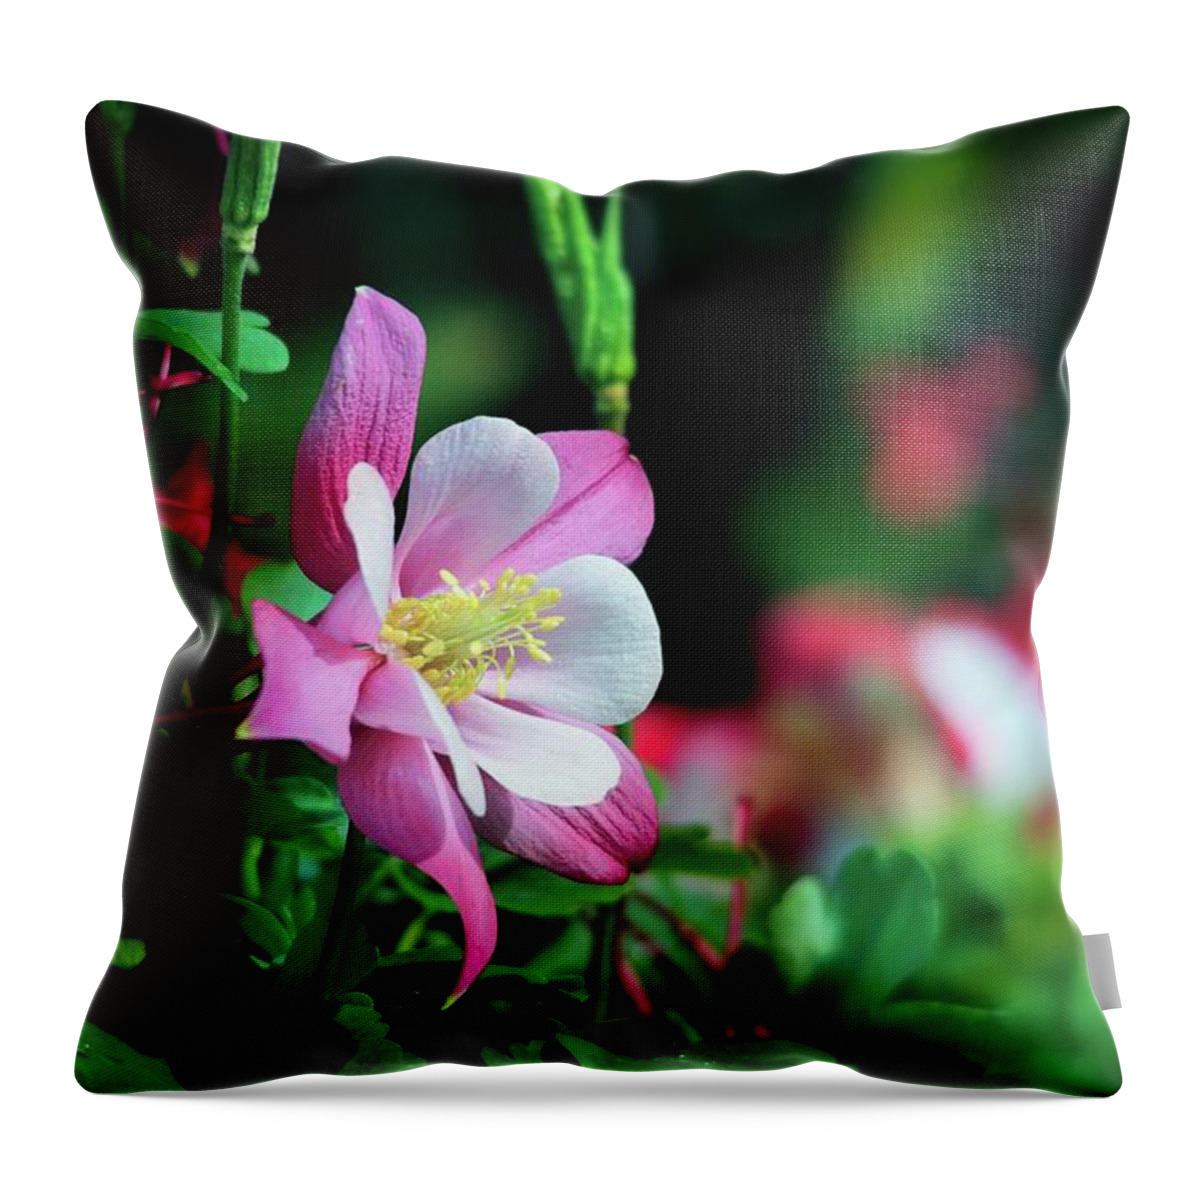 Wildflowers Throw Pillow featuring the photograph Soft Pink Columbine by Lynn Bauer